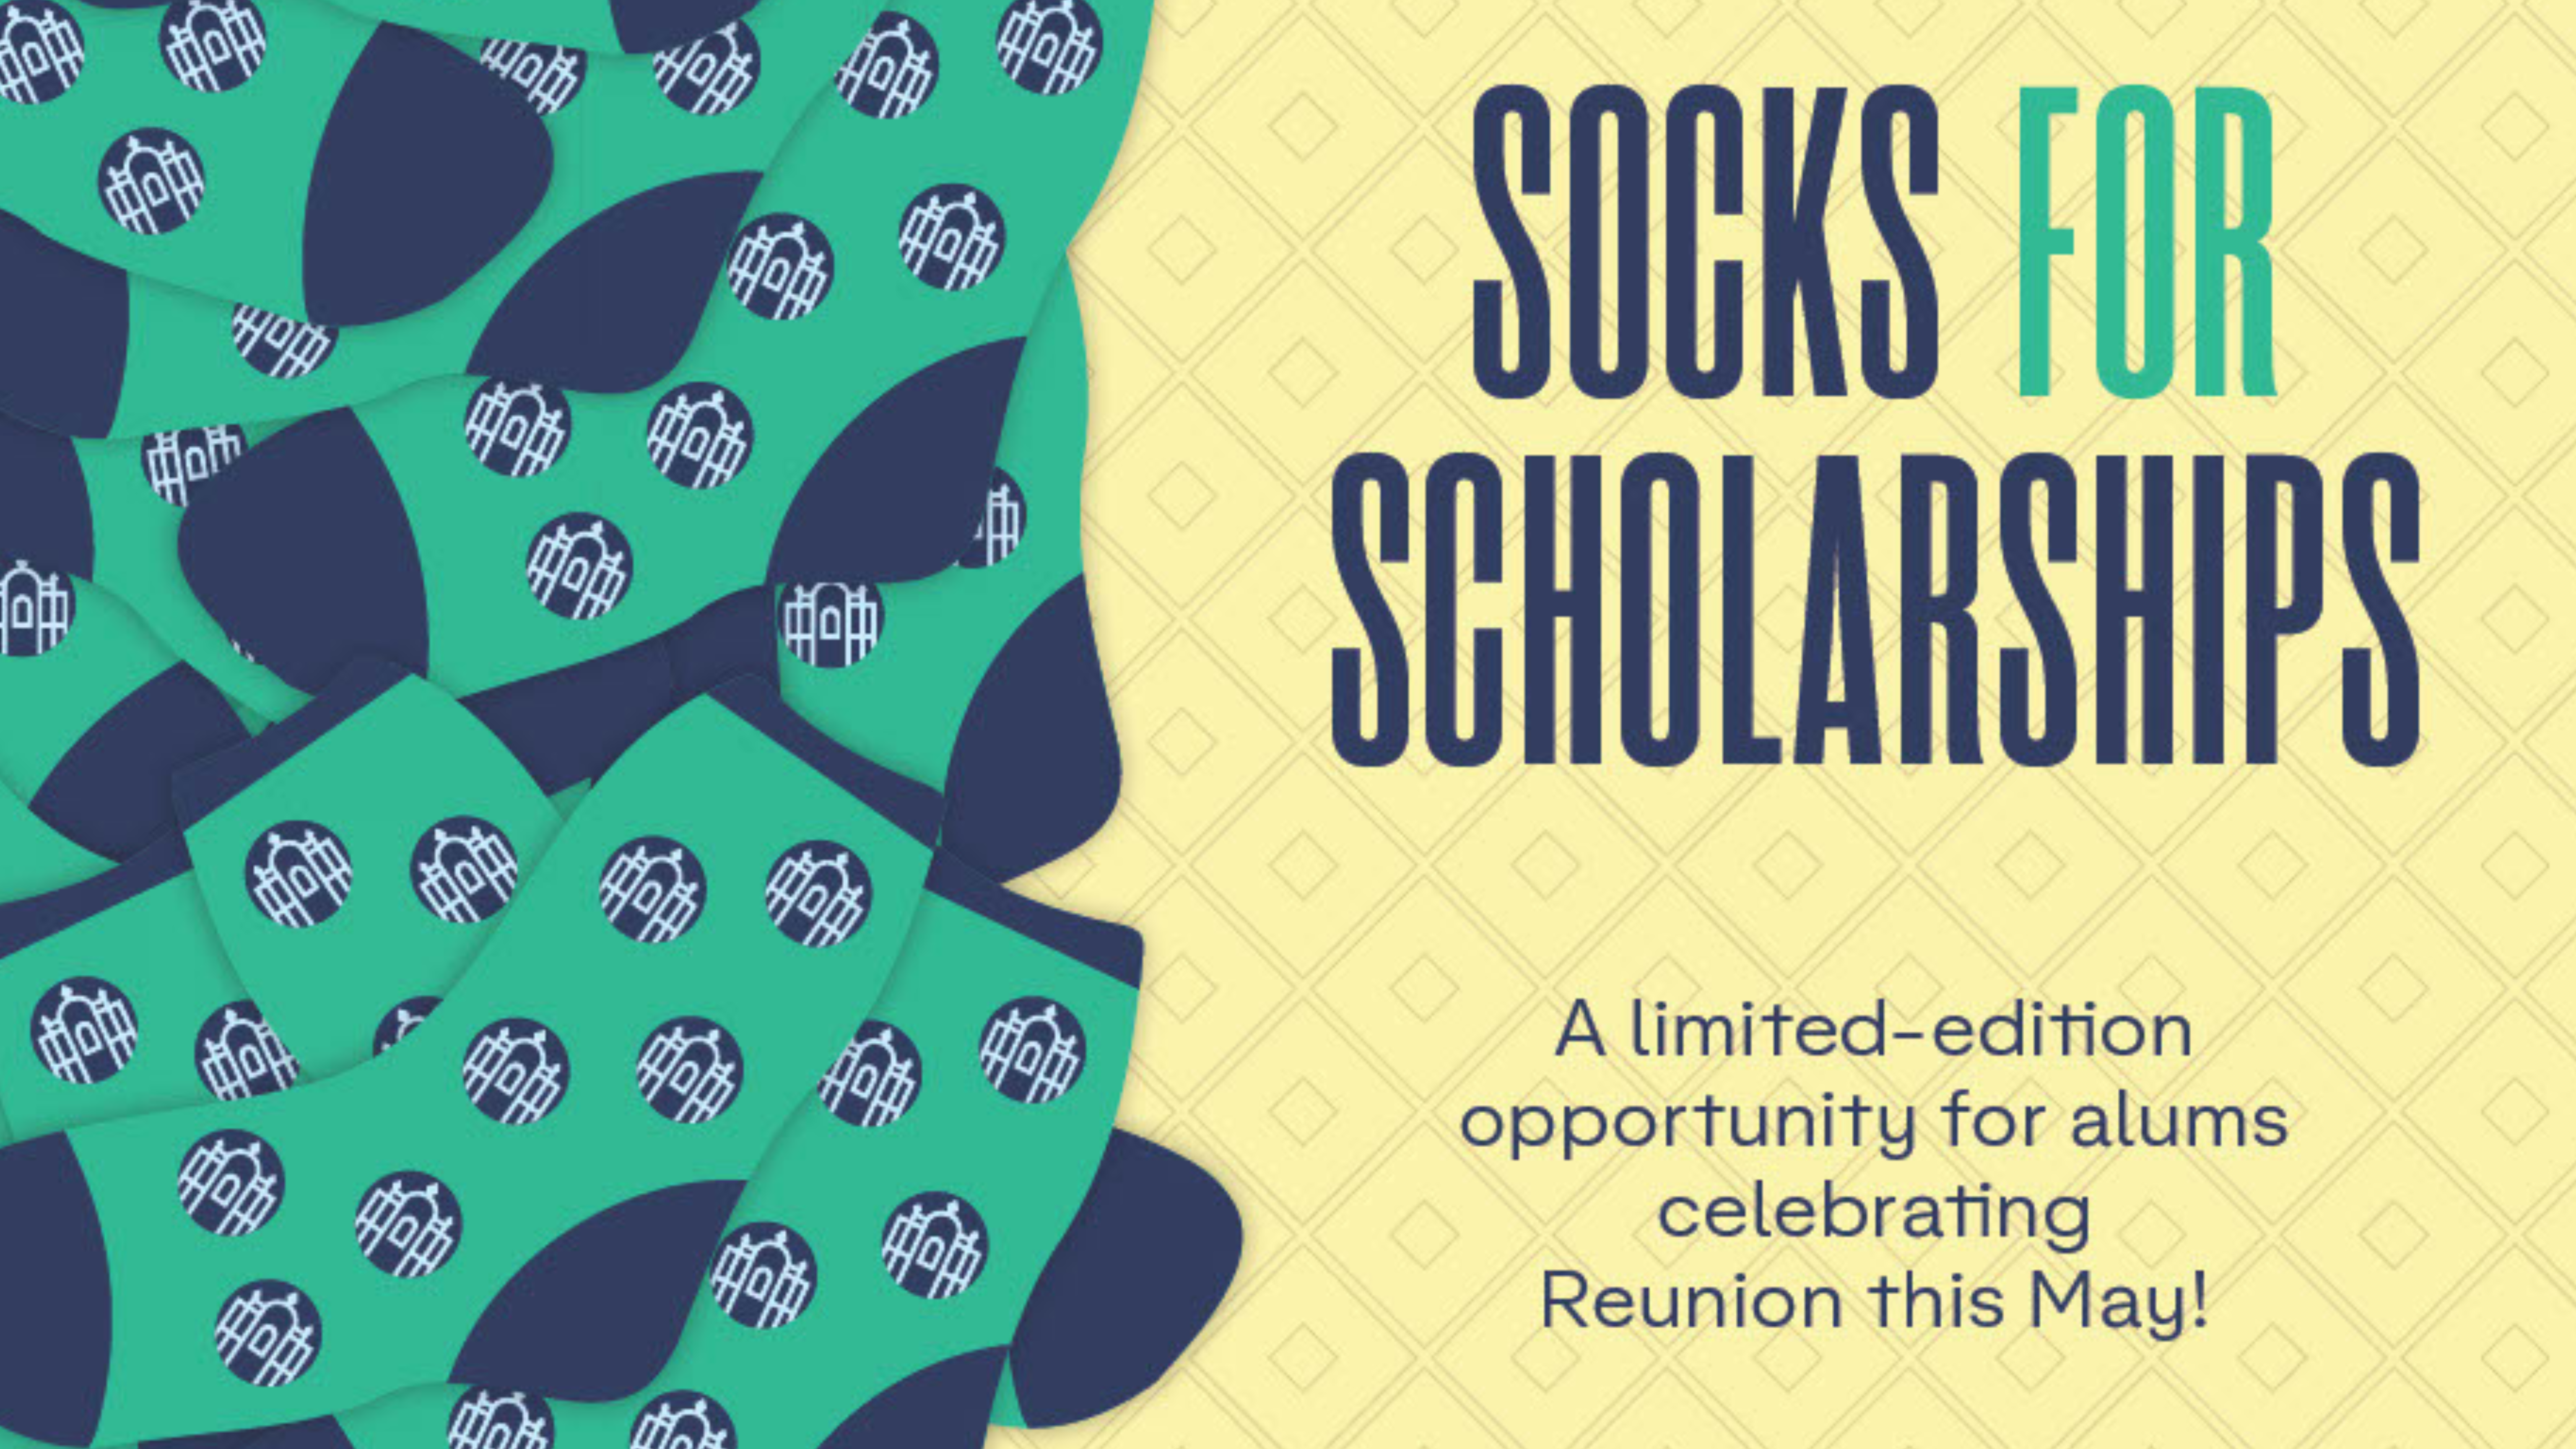 Socks for Scholarships: A limited-edition opportunity for alums celebrating Reunion this May!